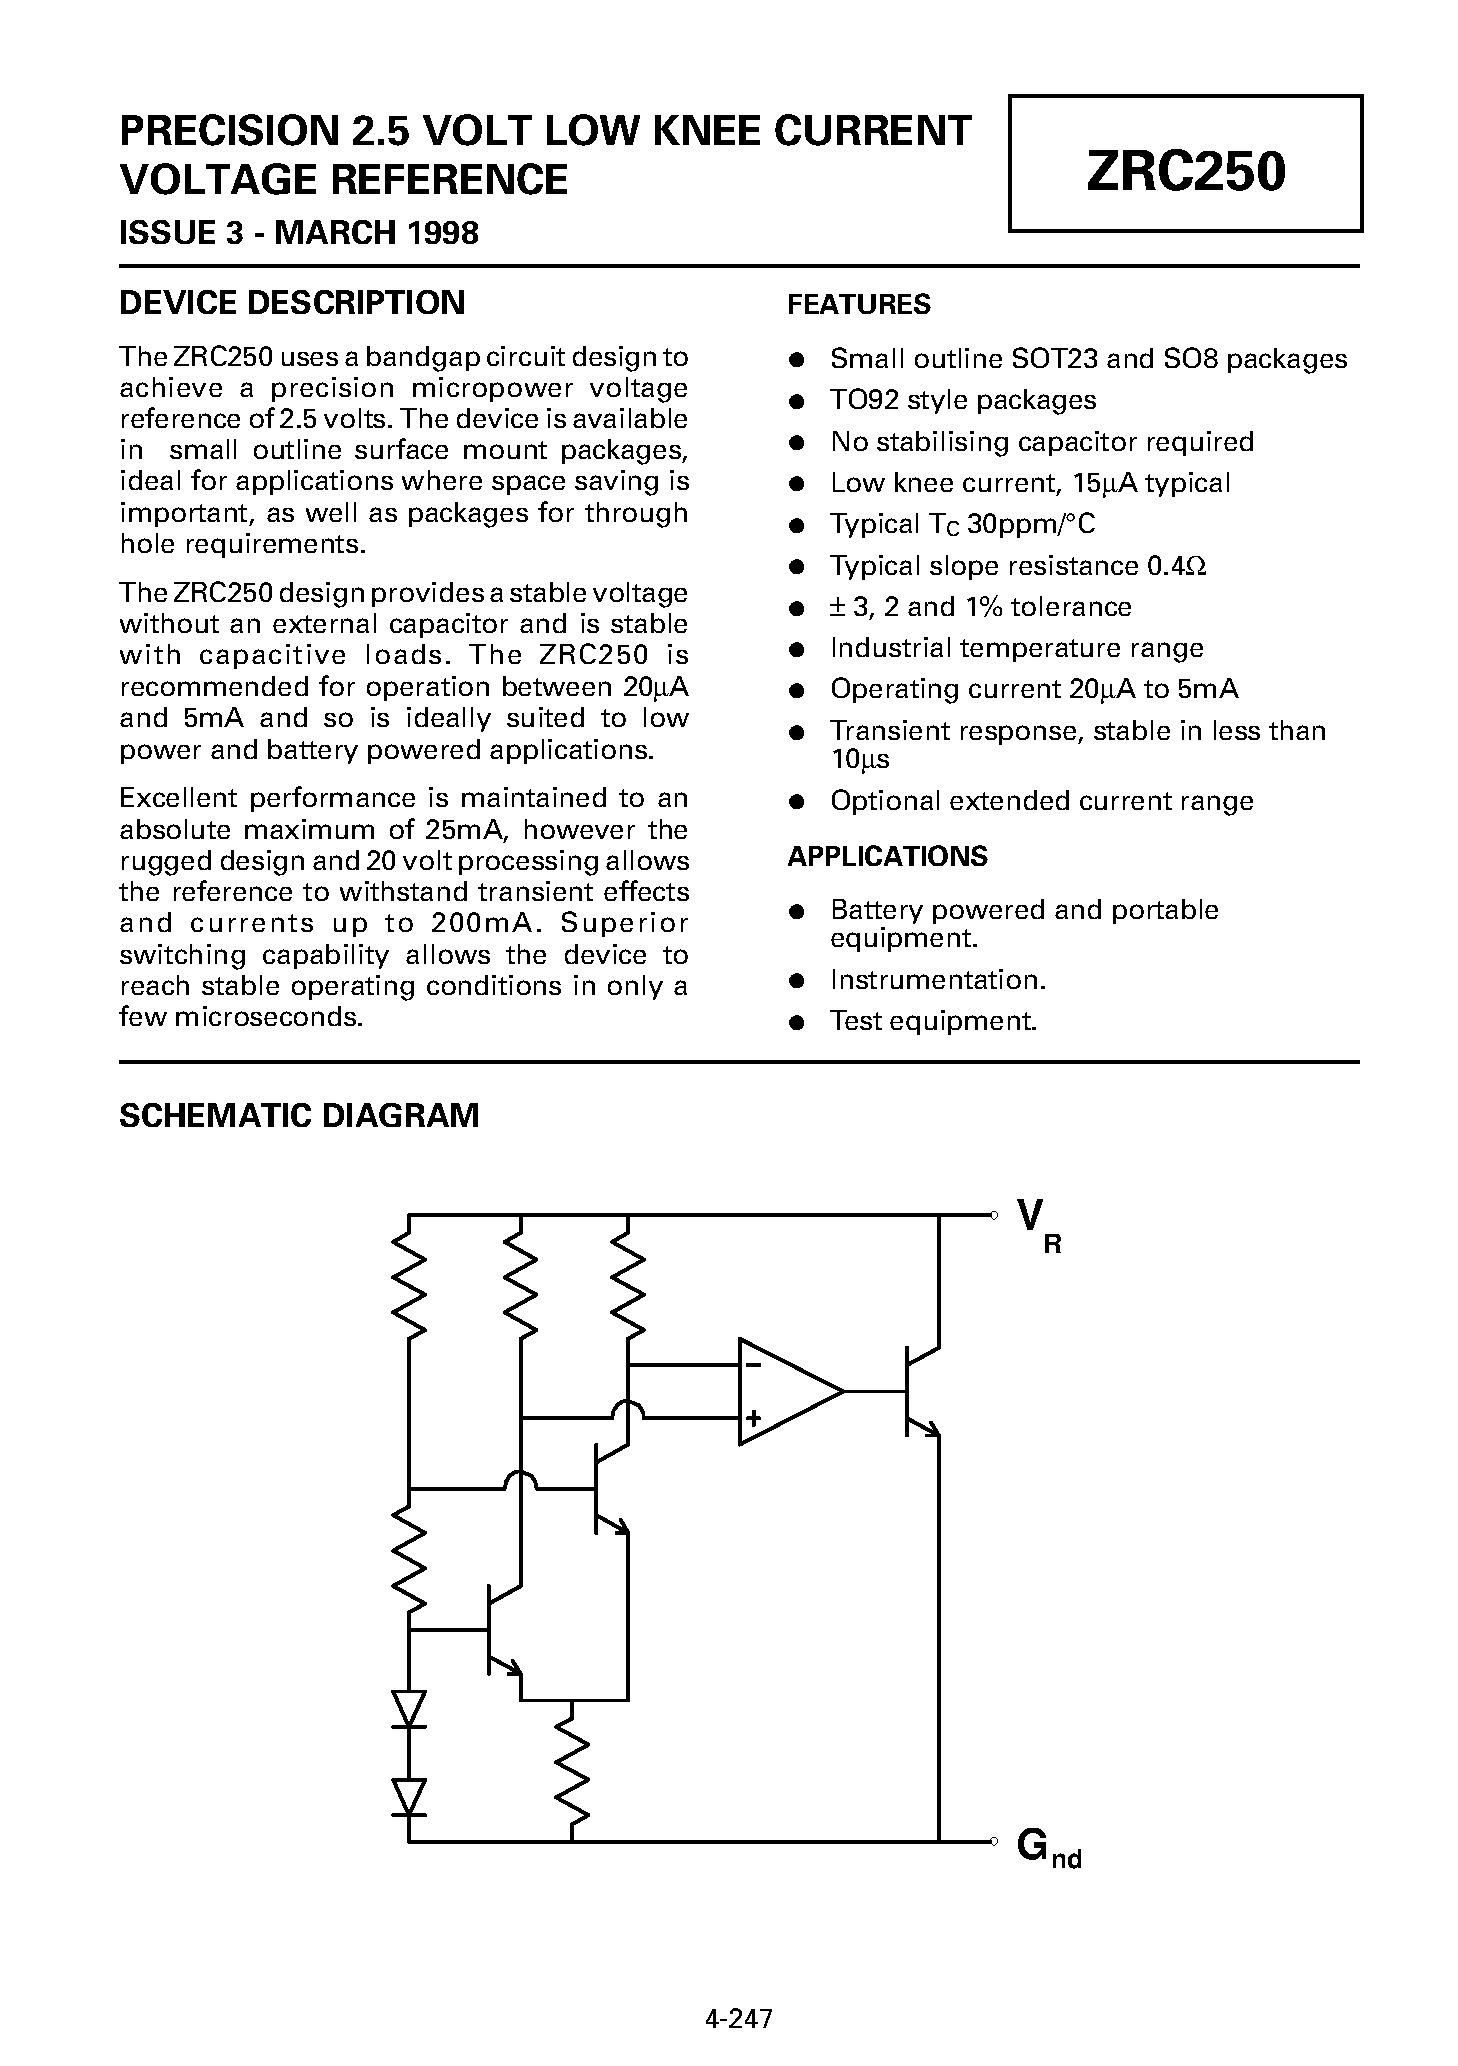 Datasheet ZRC250Y02 - PRECISION 2.5 VOLT LOW KNEE CURRENT VOLTAGE REFERENCE page 1